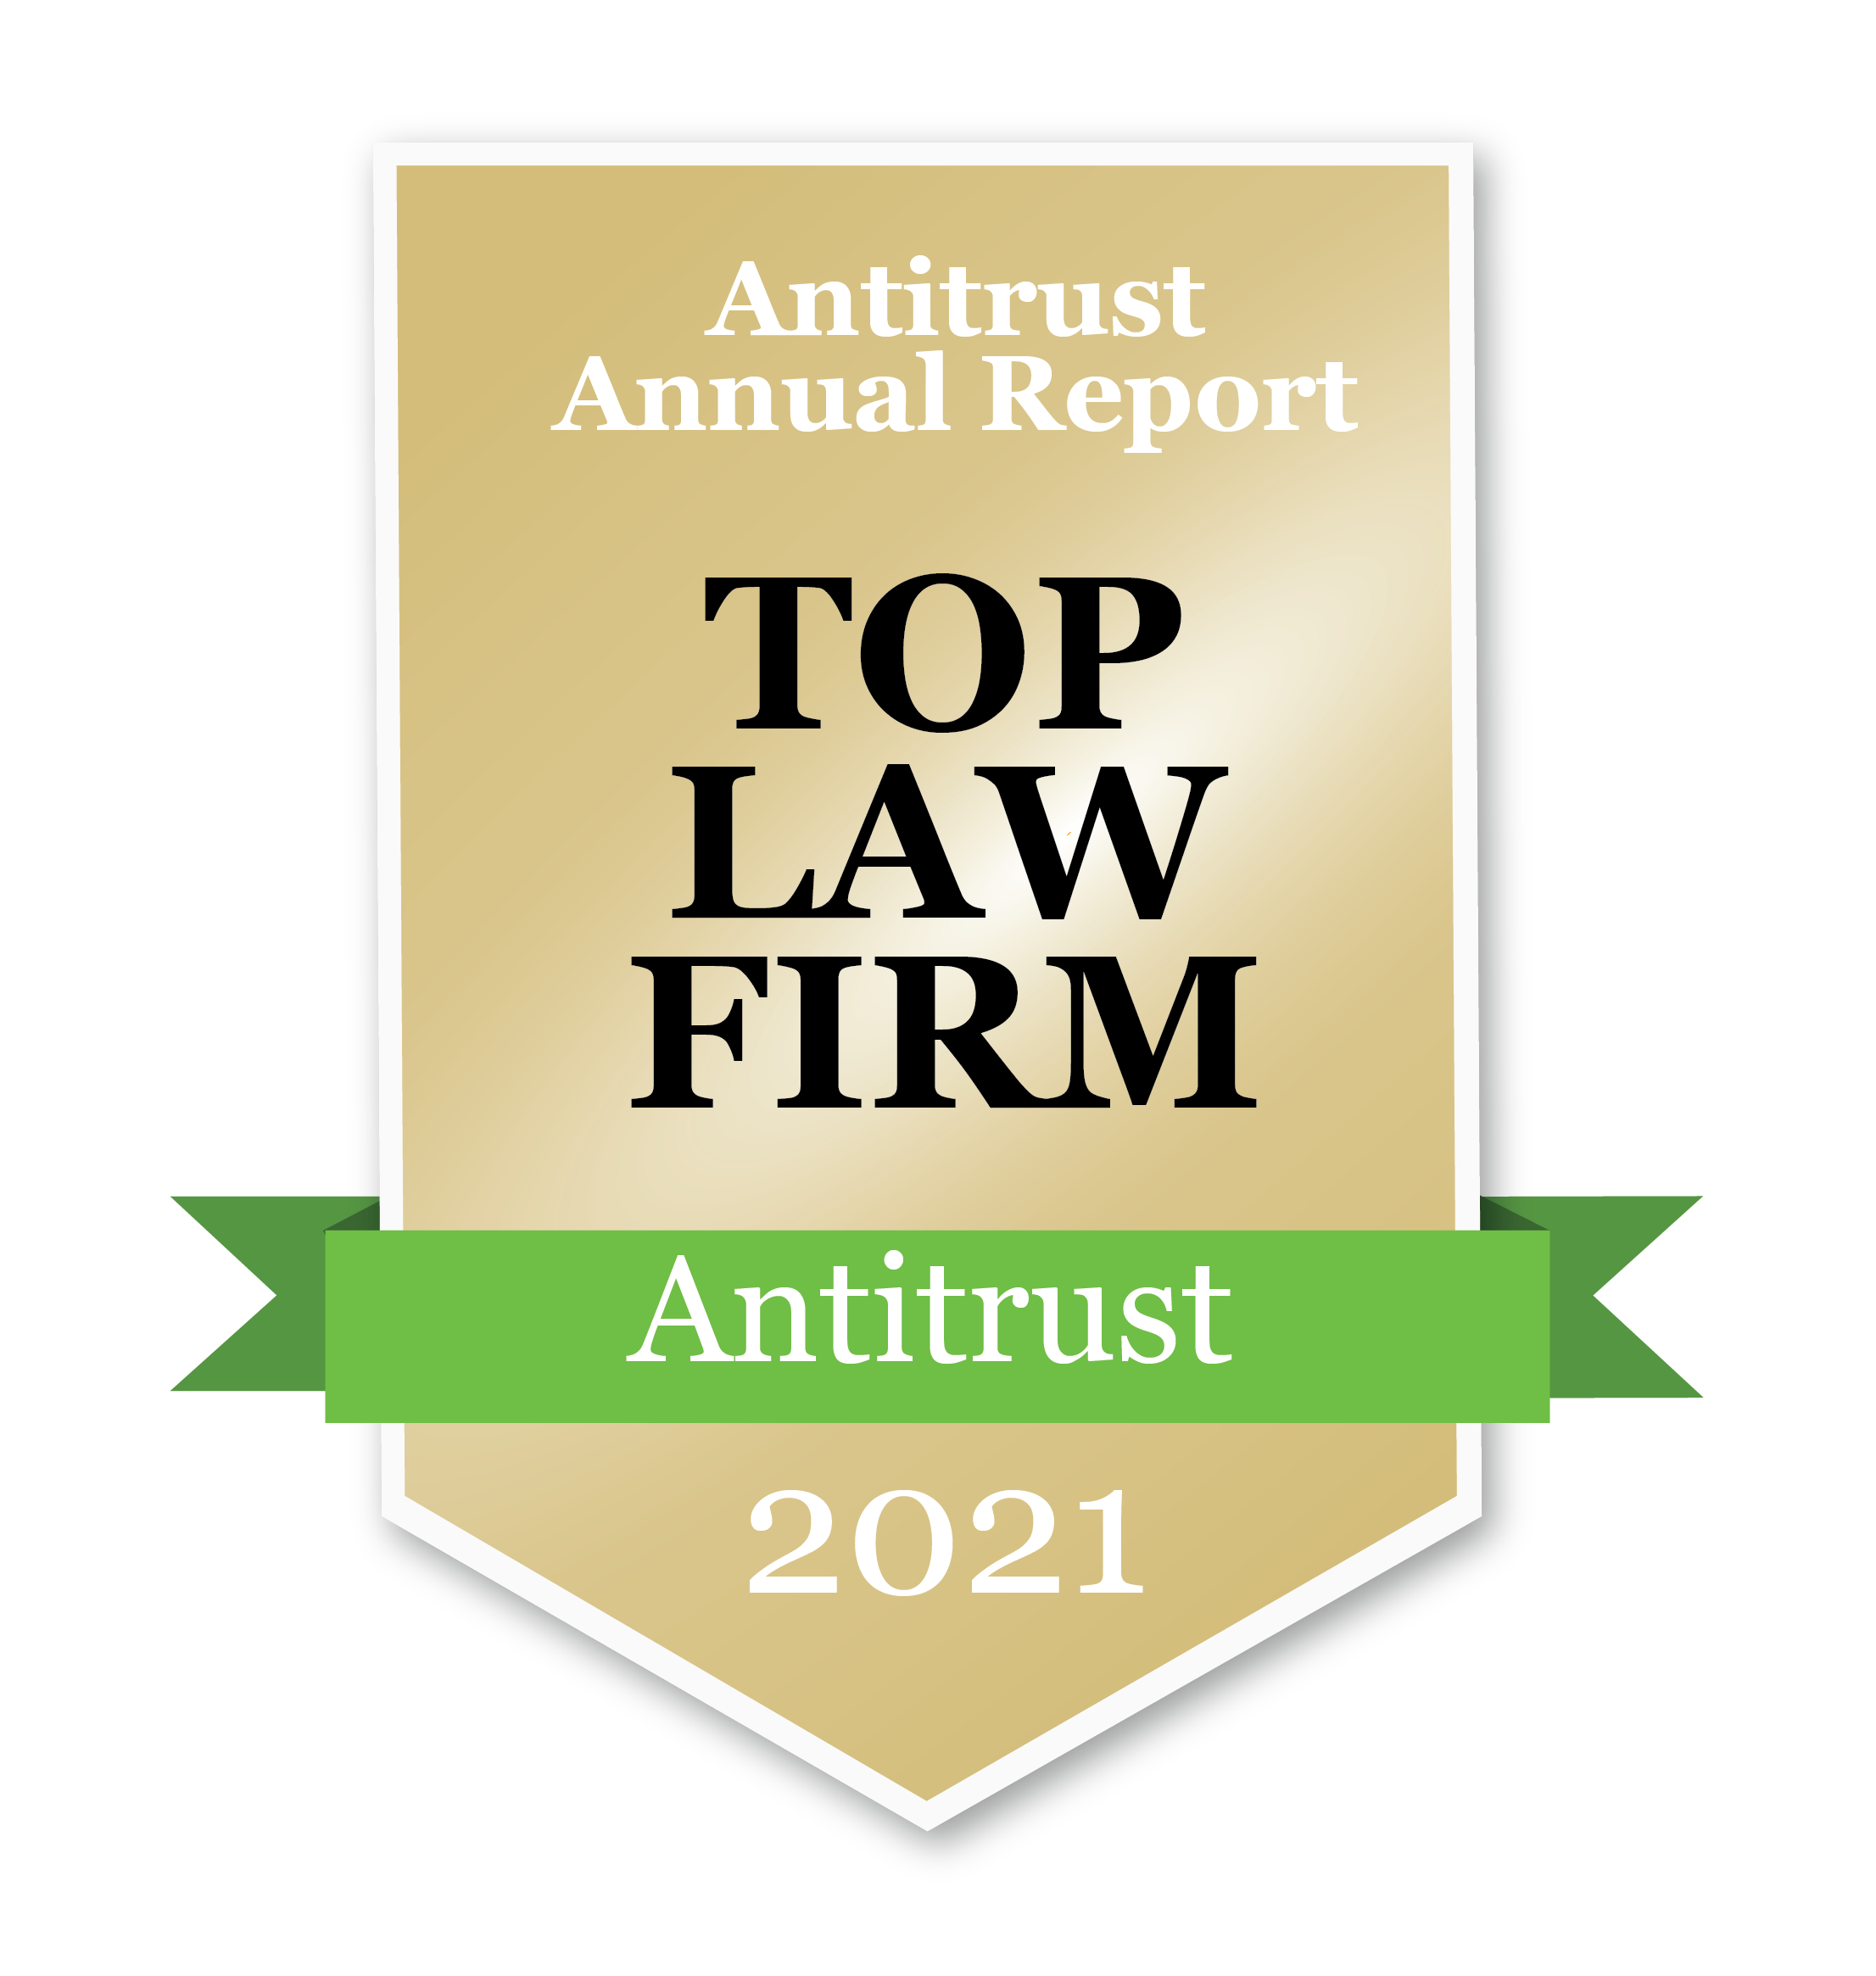 Antitrust Annual Report Top Law Firm 2021